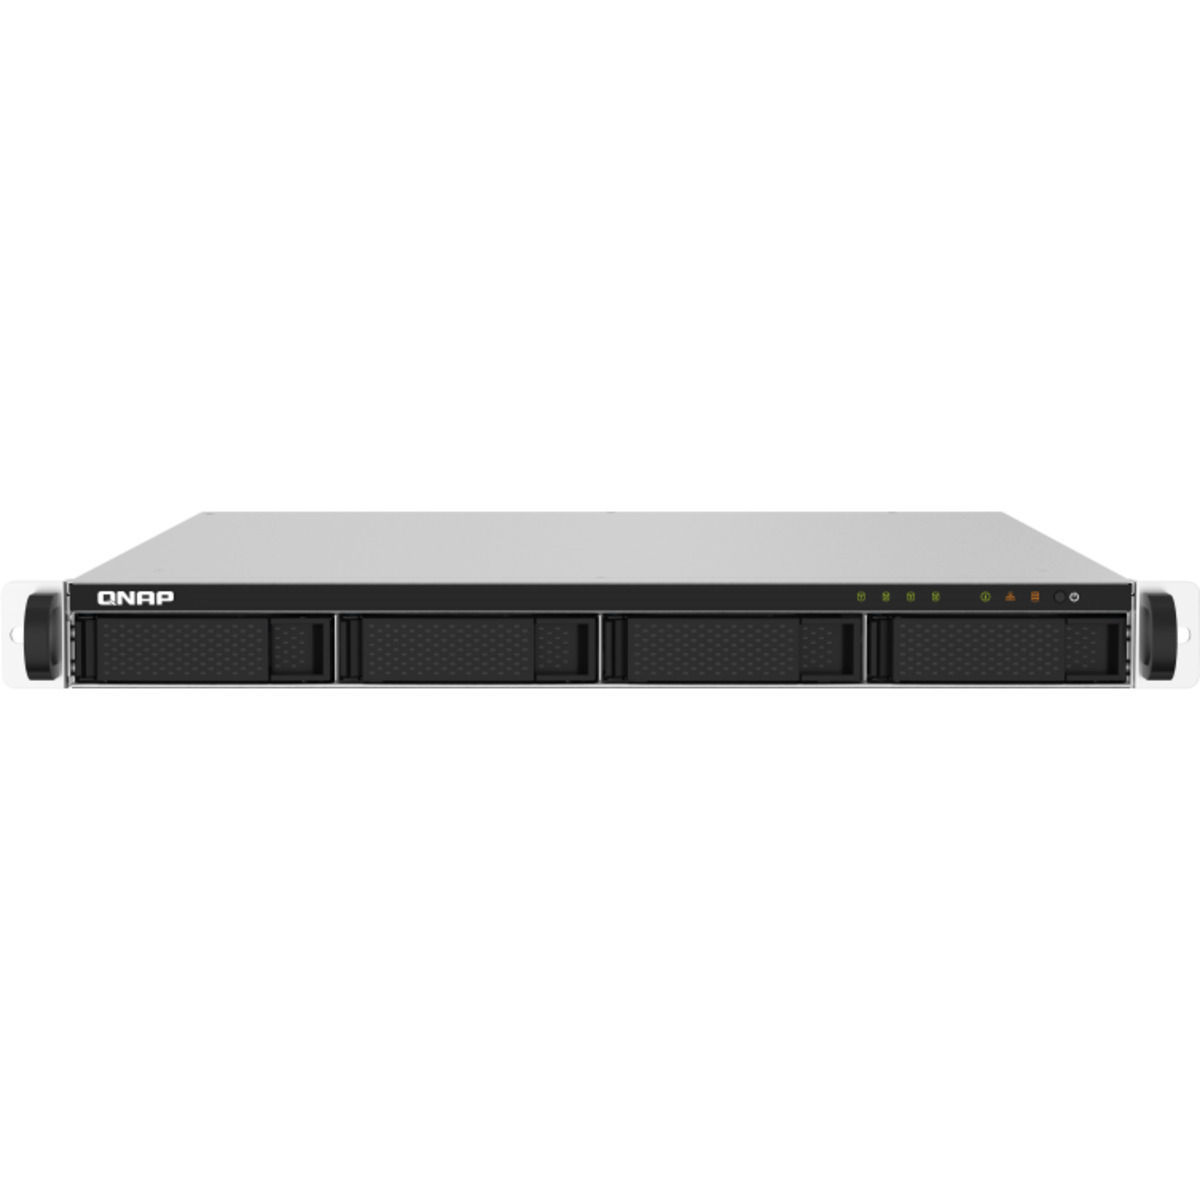 buy $4658 QNAP TS-432PXU-RP 32tb RackMount NAS - Network Attached Storage Device 4x8000gb Samsung 870 QVO MZ-77Q8T0 2.5 SATA 6Gb/s SSD CONSUMER Class Drives Installed - Burn-In Tested - FREE RAM UPGRADE - nas headquarters buy network attached storage server device das new raid-5 free shipping usa christmas new year holiday sale TS-432PXU-RP